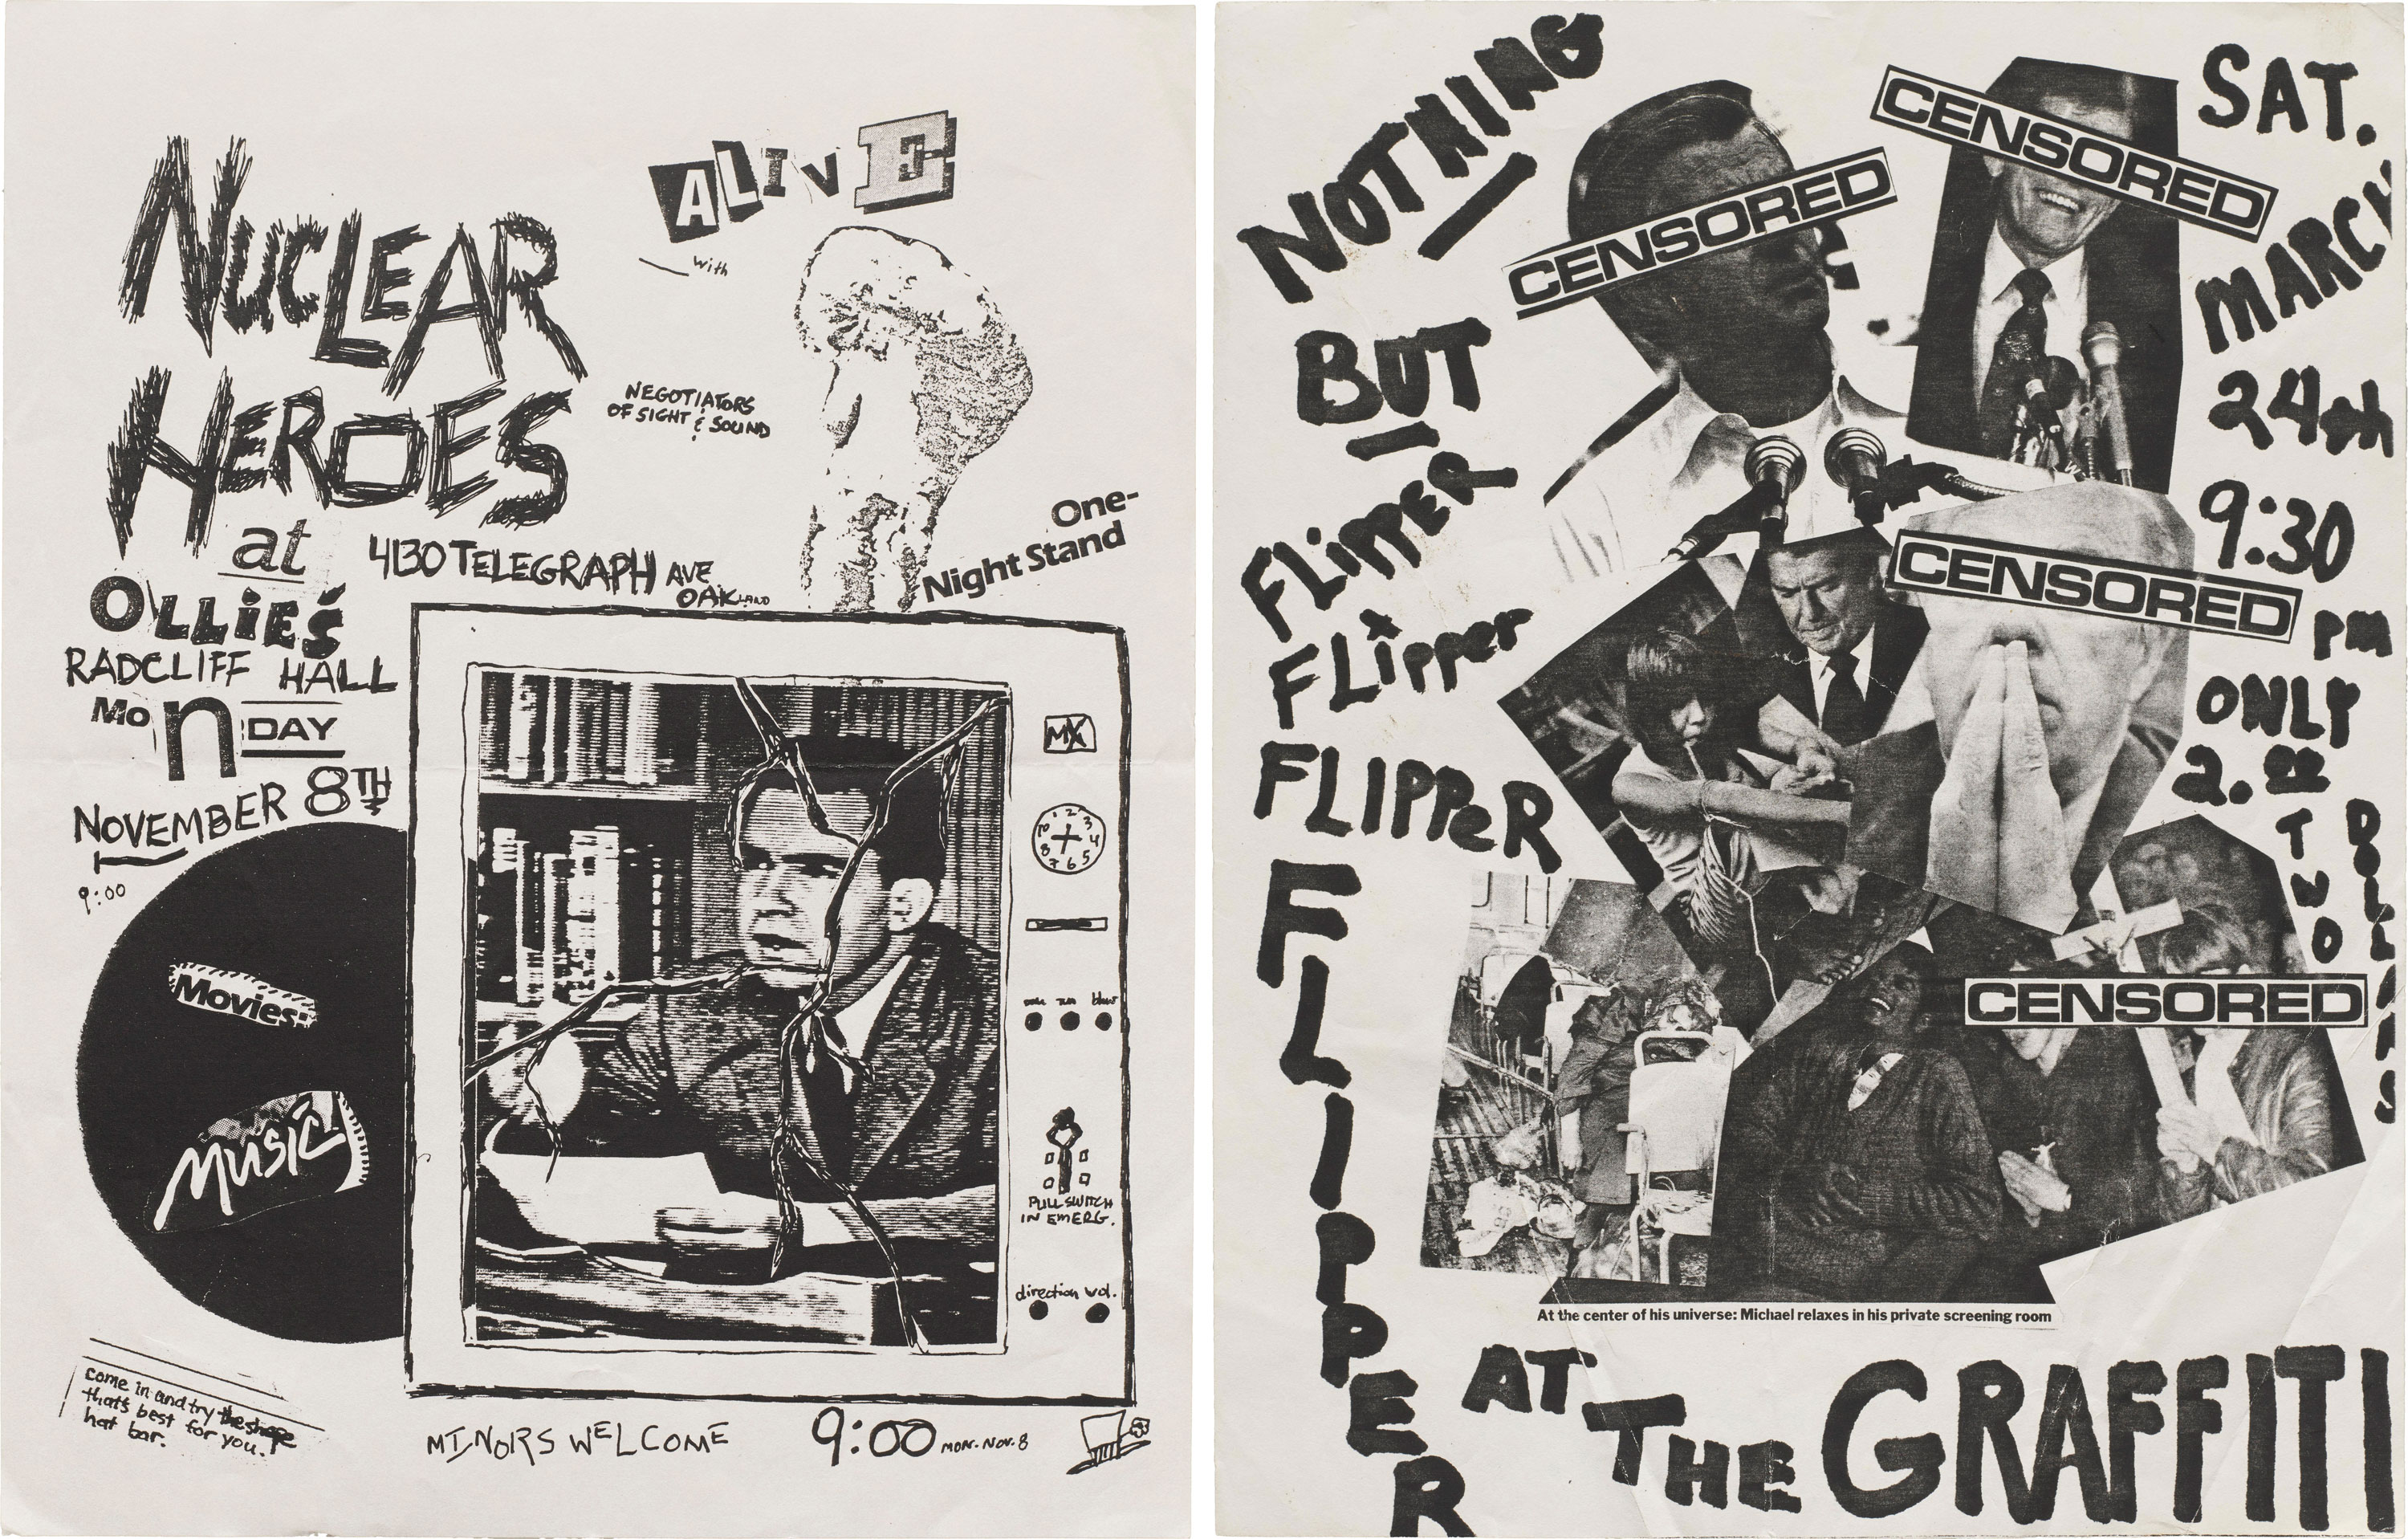 Left: Flyer for the Nuclear Heroes at Ollie’s Radcliff[e] Hall, Berkeley, 1982. Right: Flyer for Flipper at the Graffiti, San Francisco, 1984.